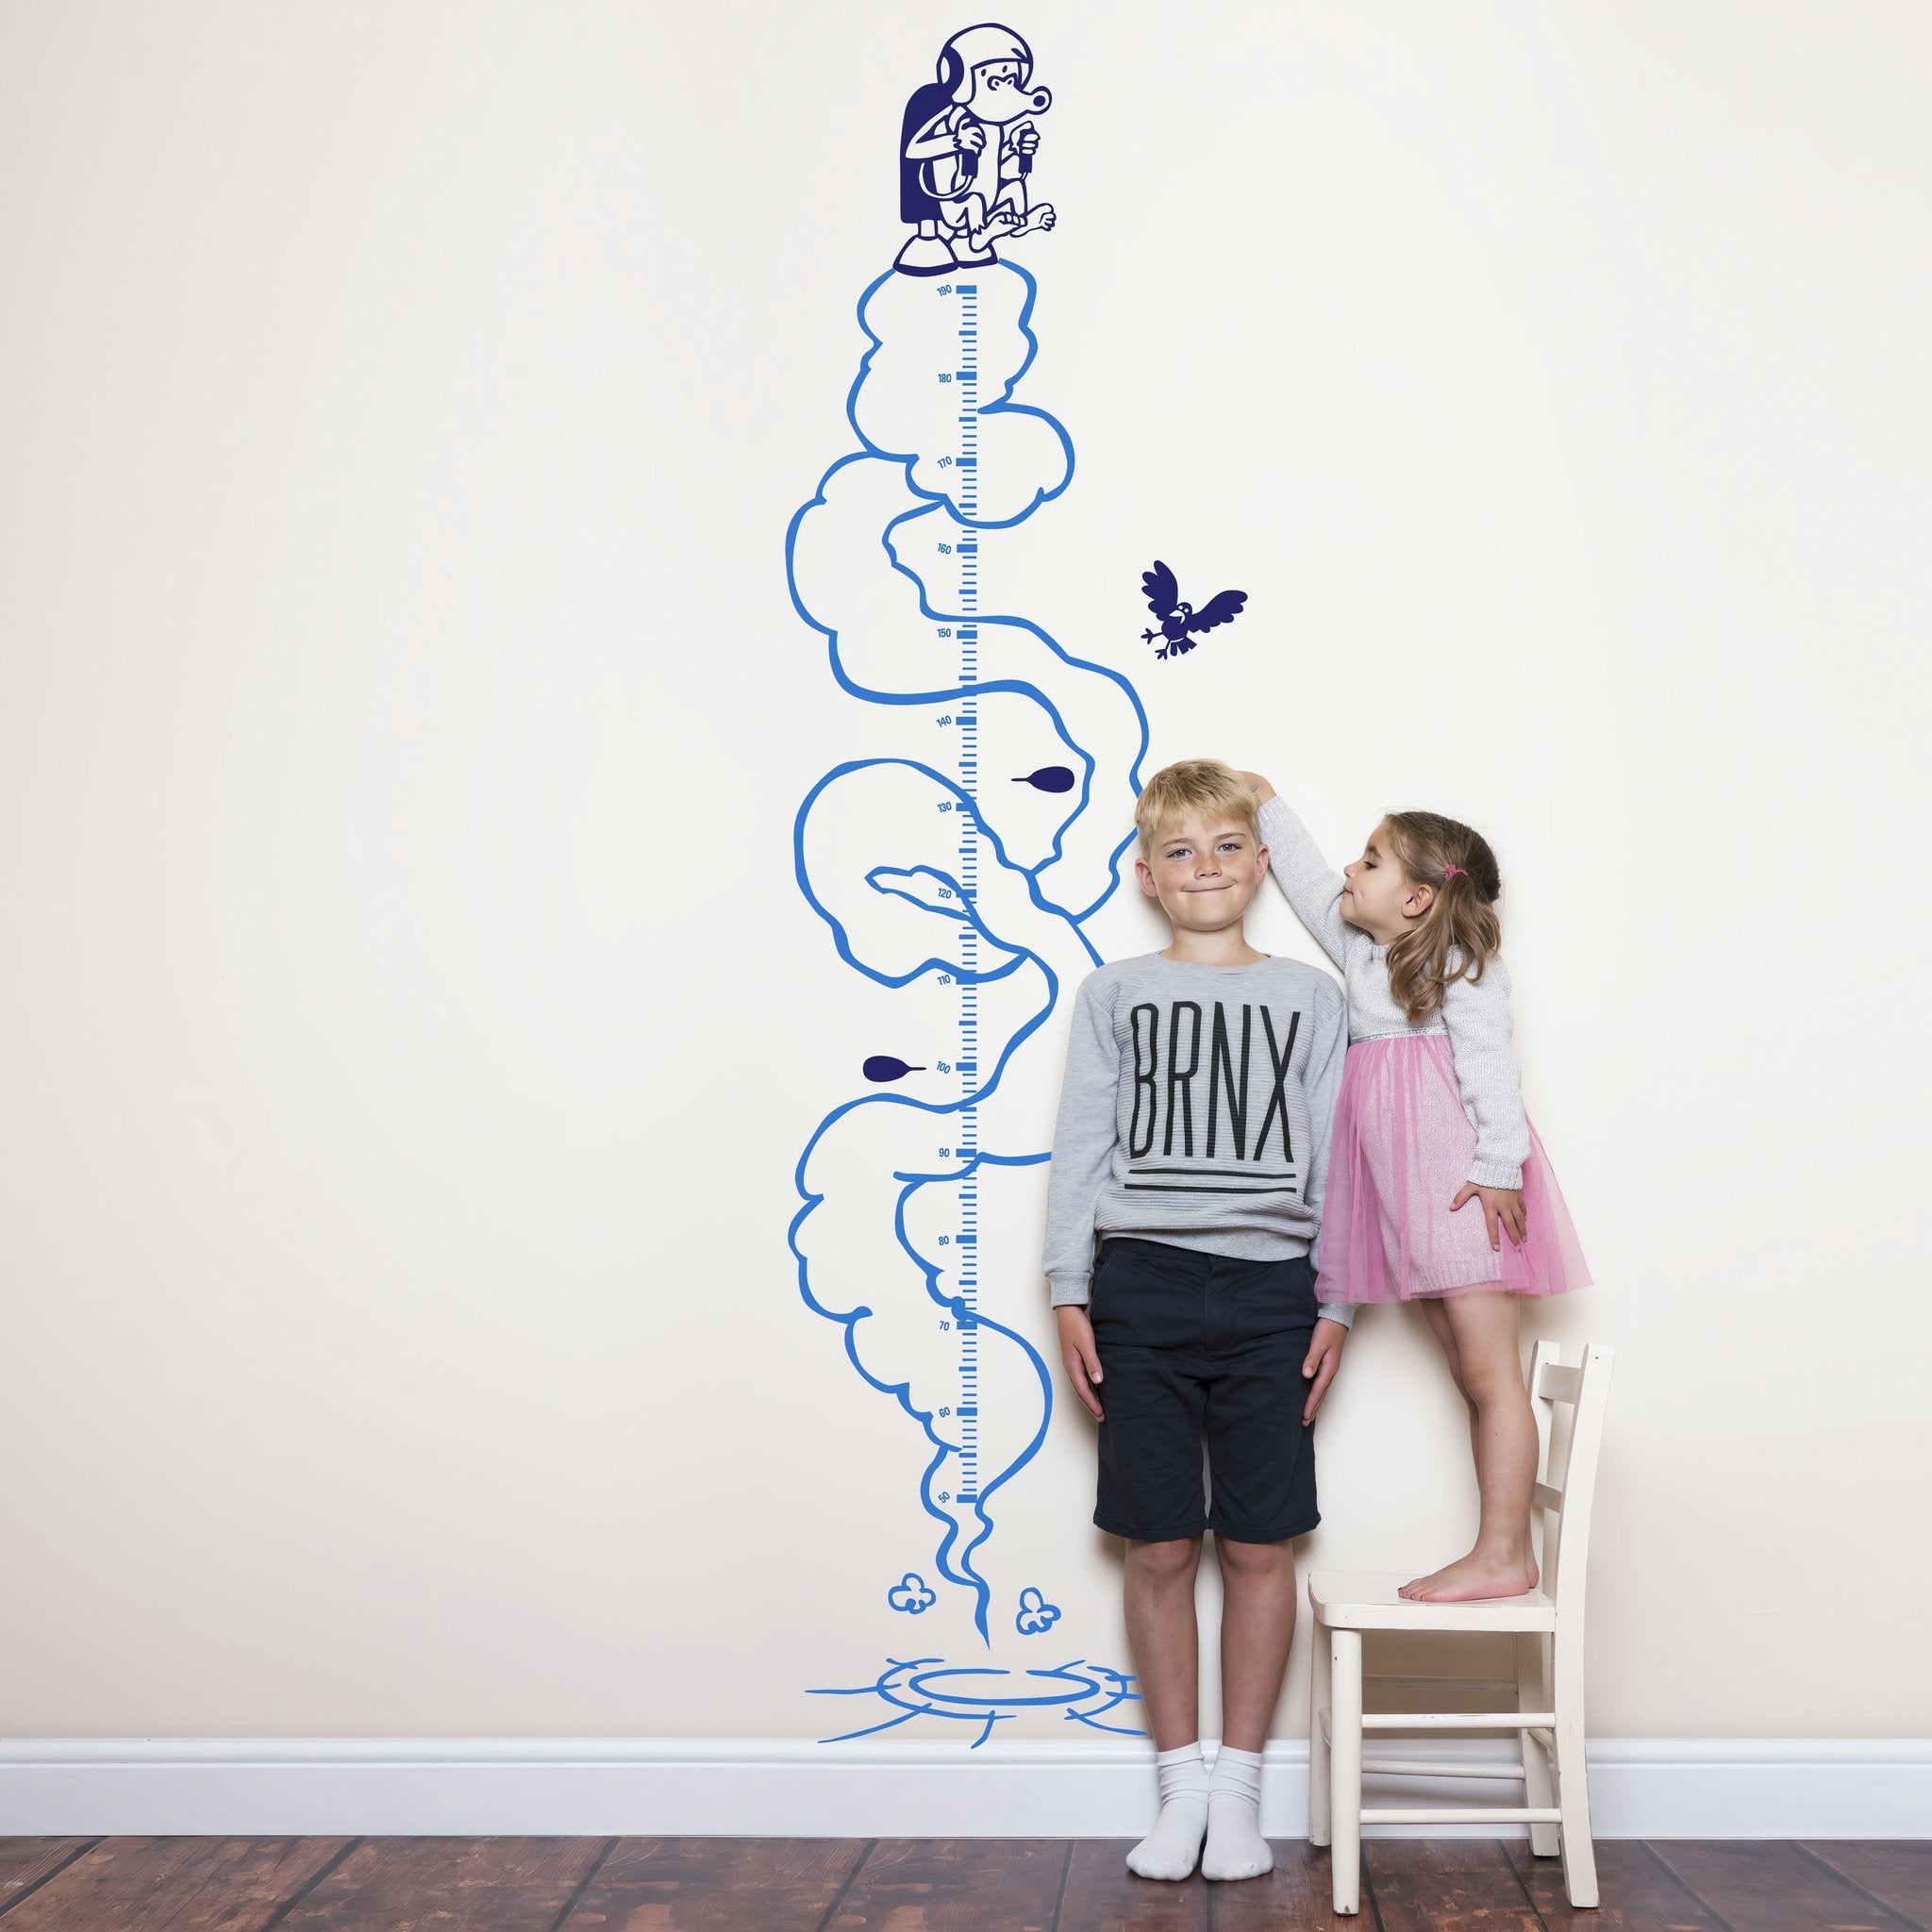 Height chart wall sticker of a monkey with a jetpack with a young boy and girl nearby.